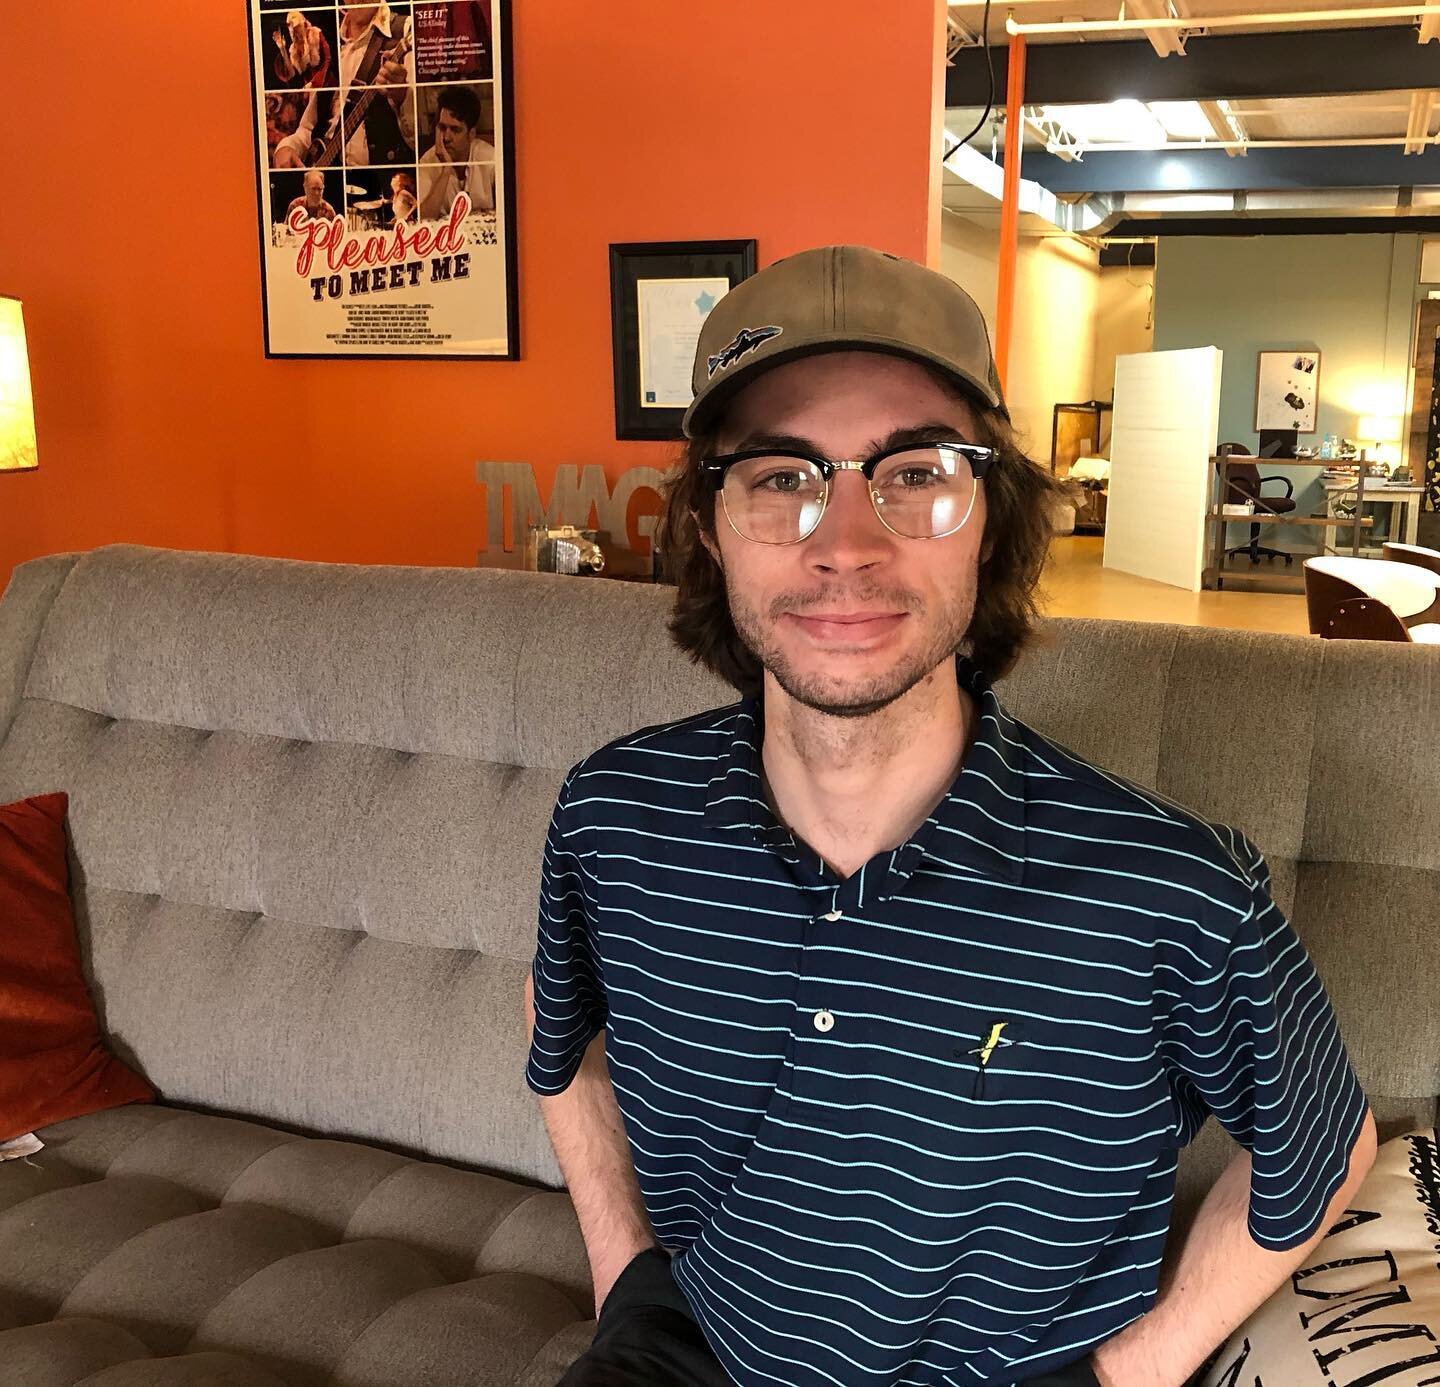 Everybody welcome our new superstar summer intern/editor/stand-in, Whit Boland!! We&rsquo;re so happy to have him on our team. 

#intern #internship #videointern #louisville #kentucky #video #videoproduction #videoproductioncompany #summerinternship